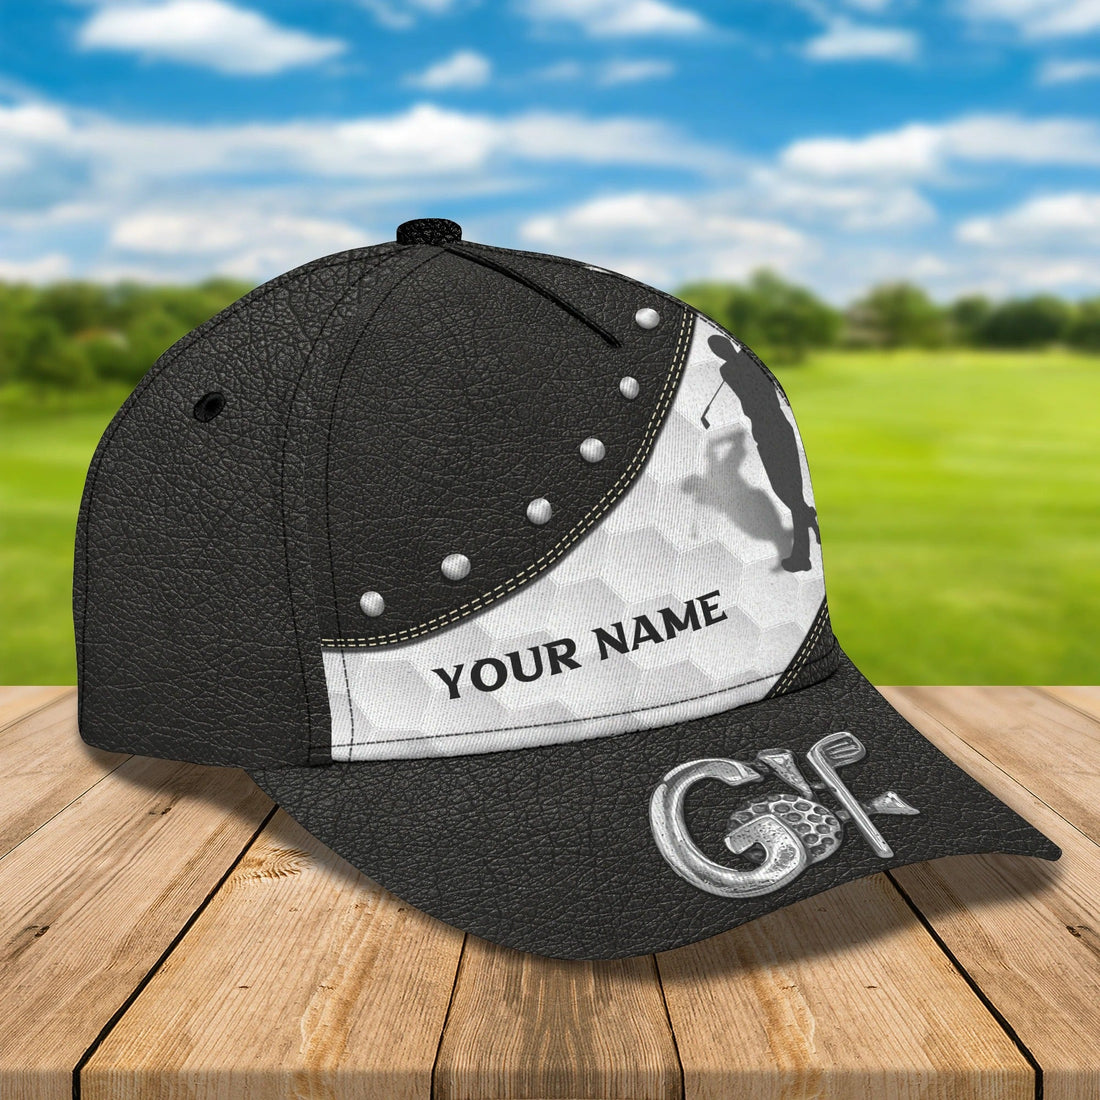 Customized Cap For Golfer, Golf Womans Cap, Classic Cap For Golf Lover, Christmas Golfer Gifts